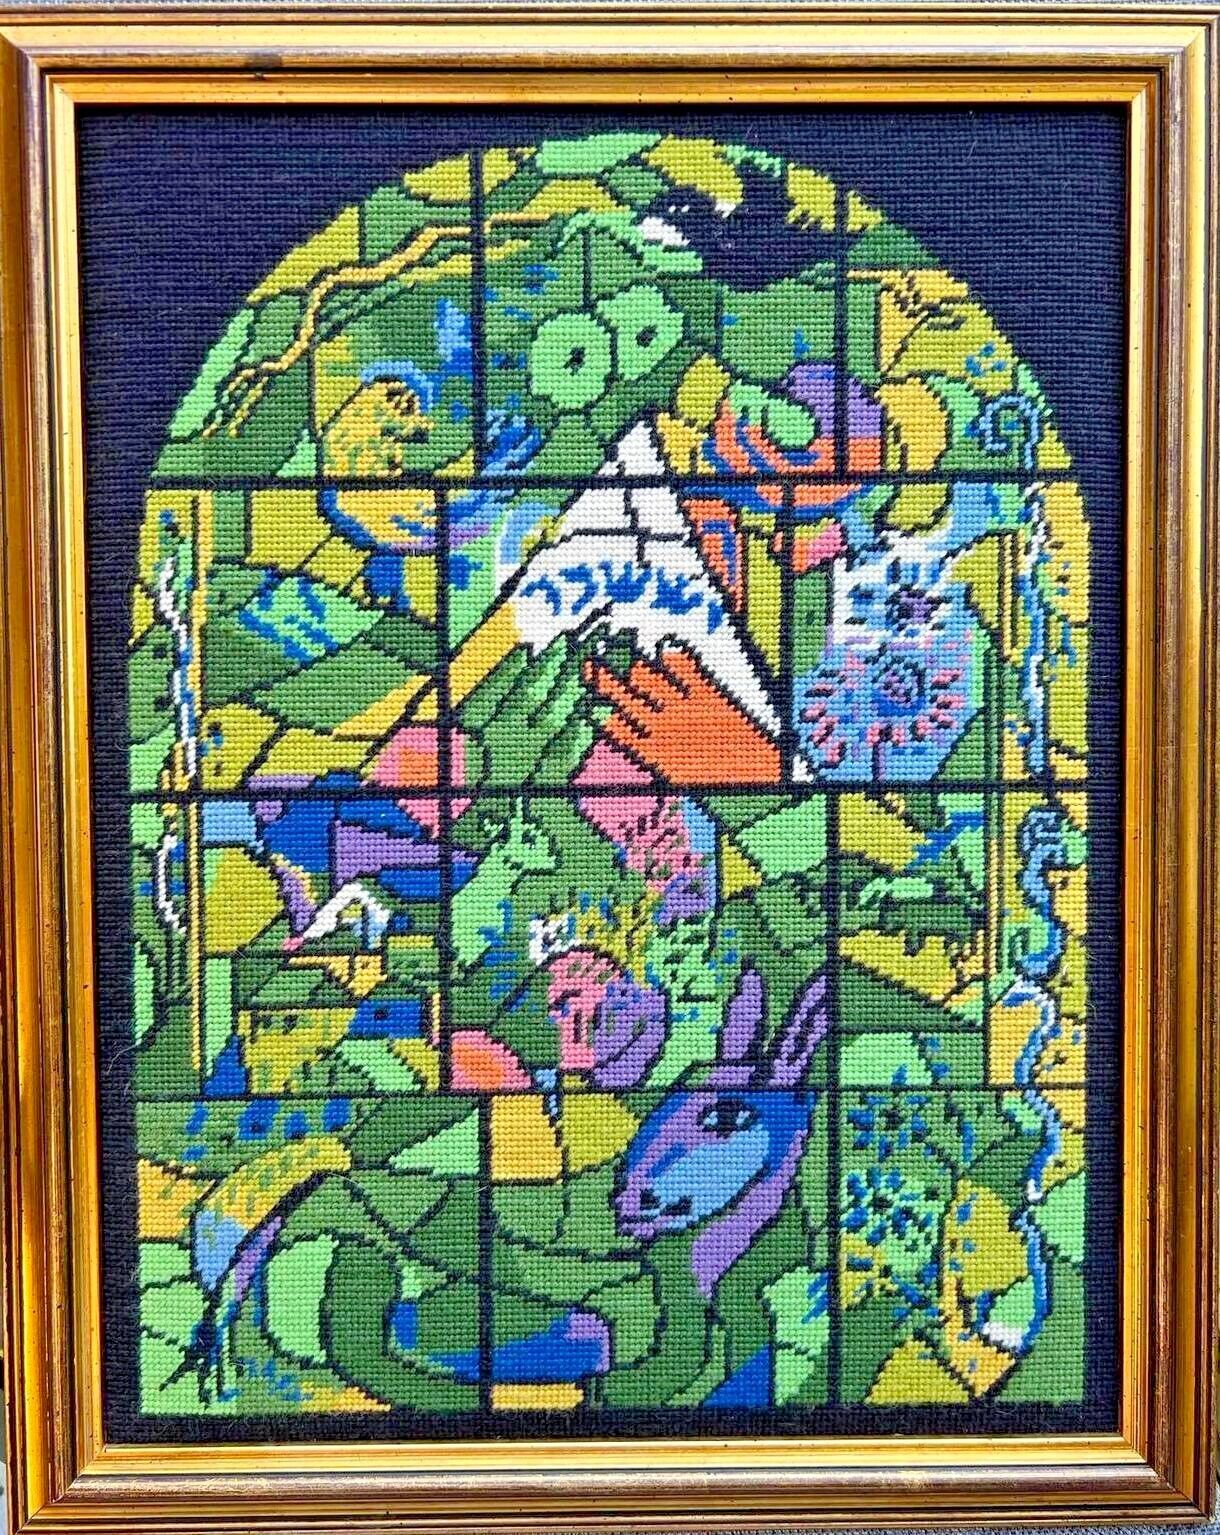 Vintage Needlepoint Marc Chagall Stained Glass Window Tribe of Judah Issachar